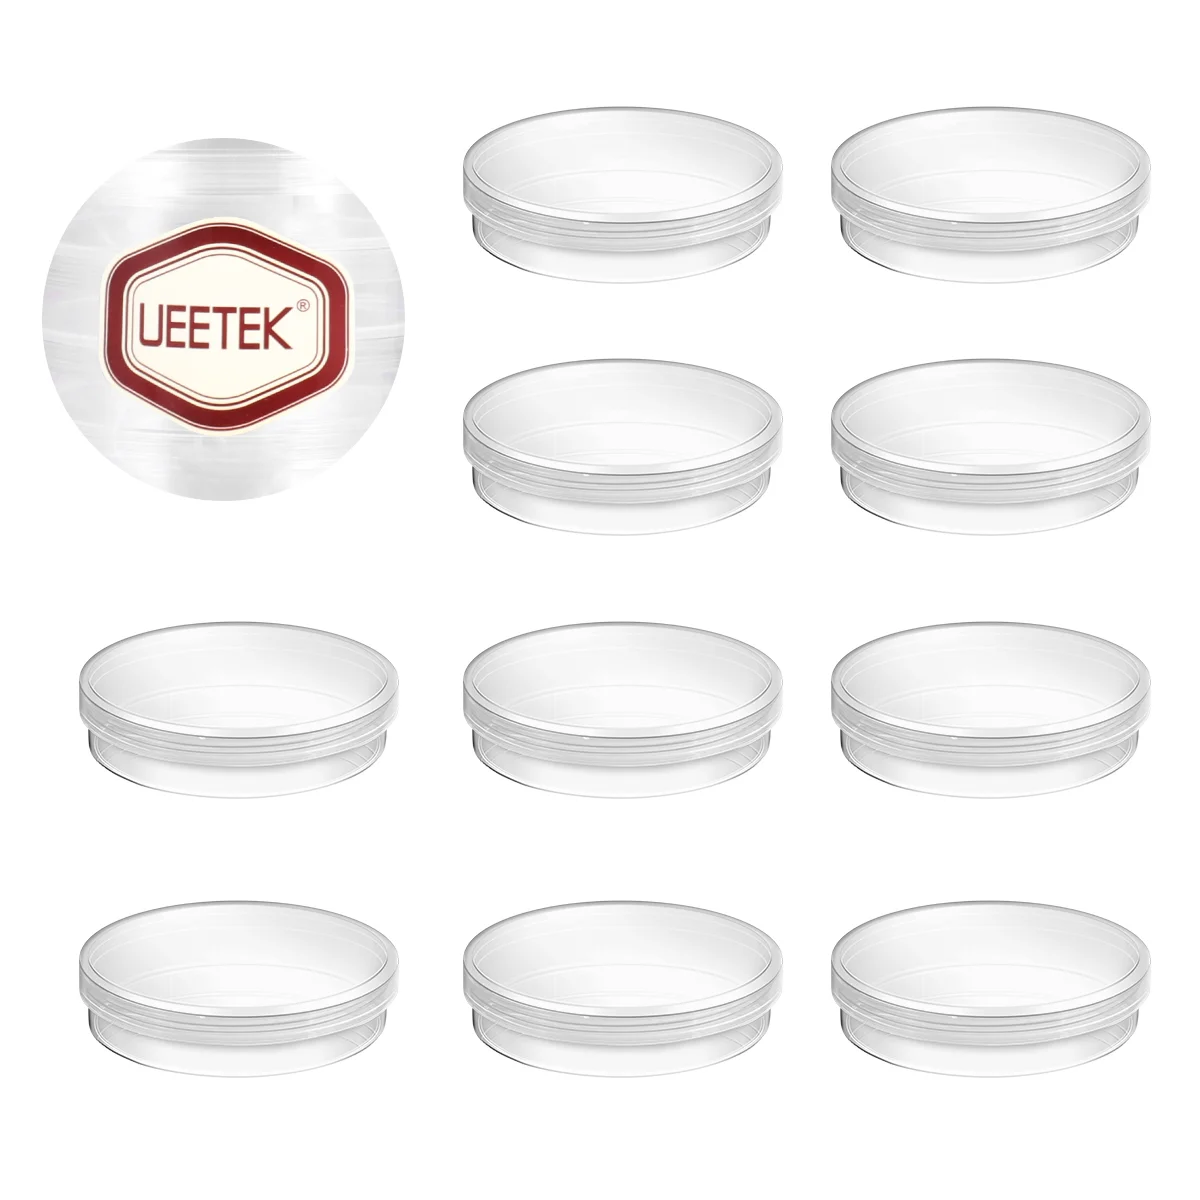 10pcs 70mm Petri Dish with Lid Culture Dishes Transparent Petri Dishes for School Biomedical Laboratory Chemistry